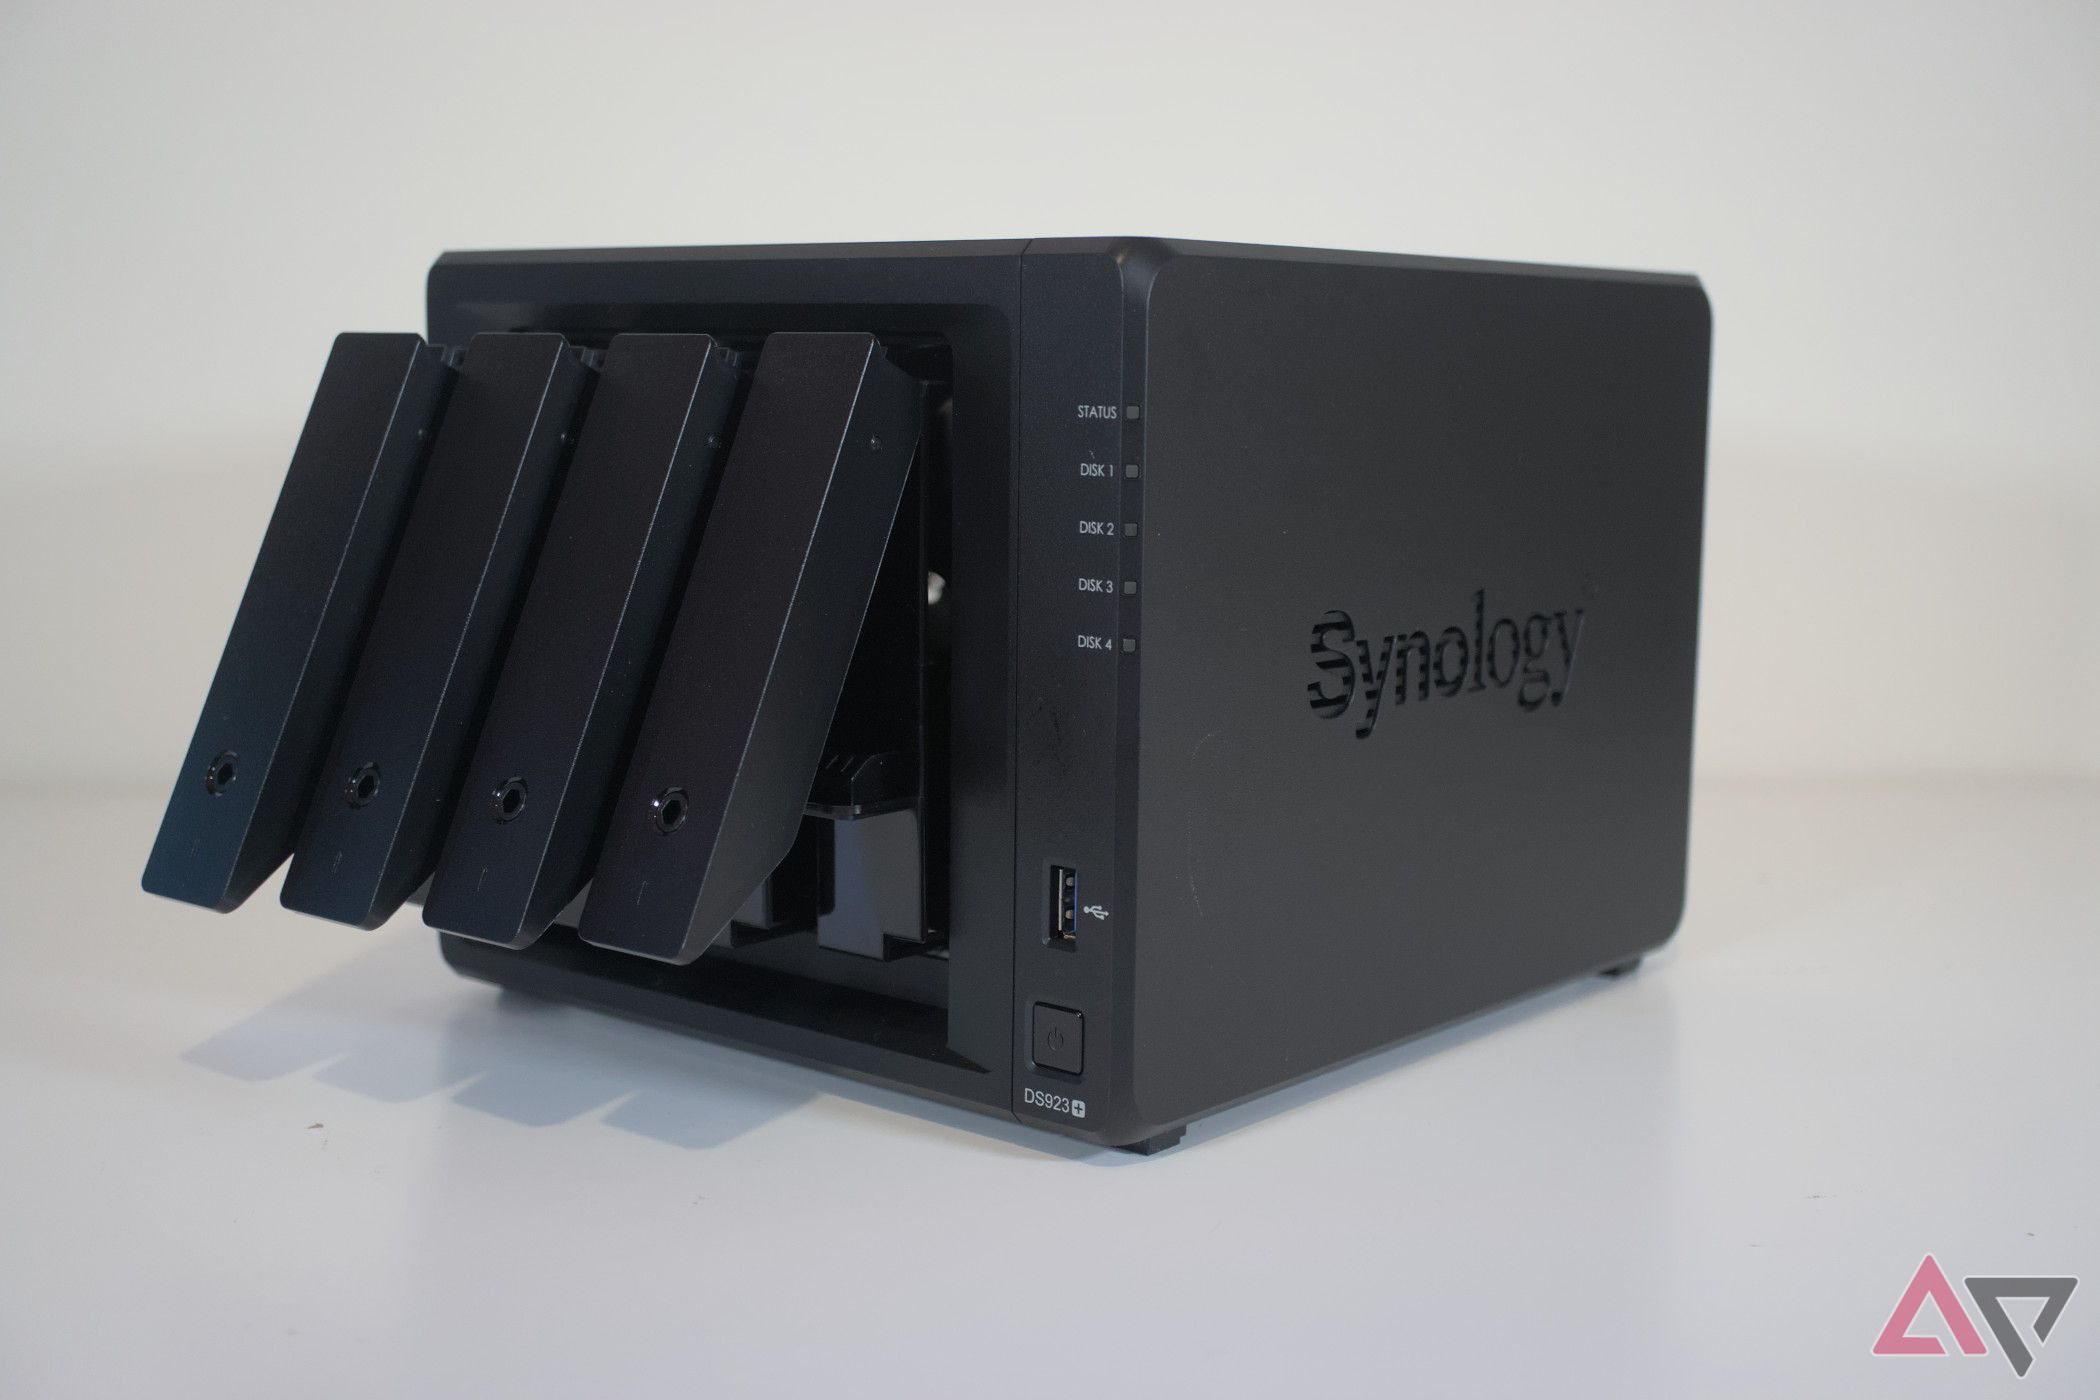 Synology DS923+ Review: The Best NAS Speeds to Date